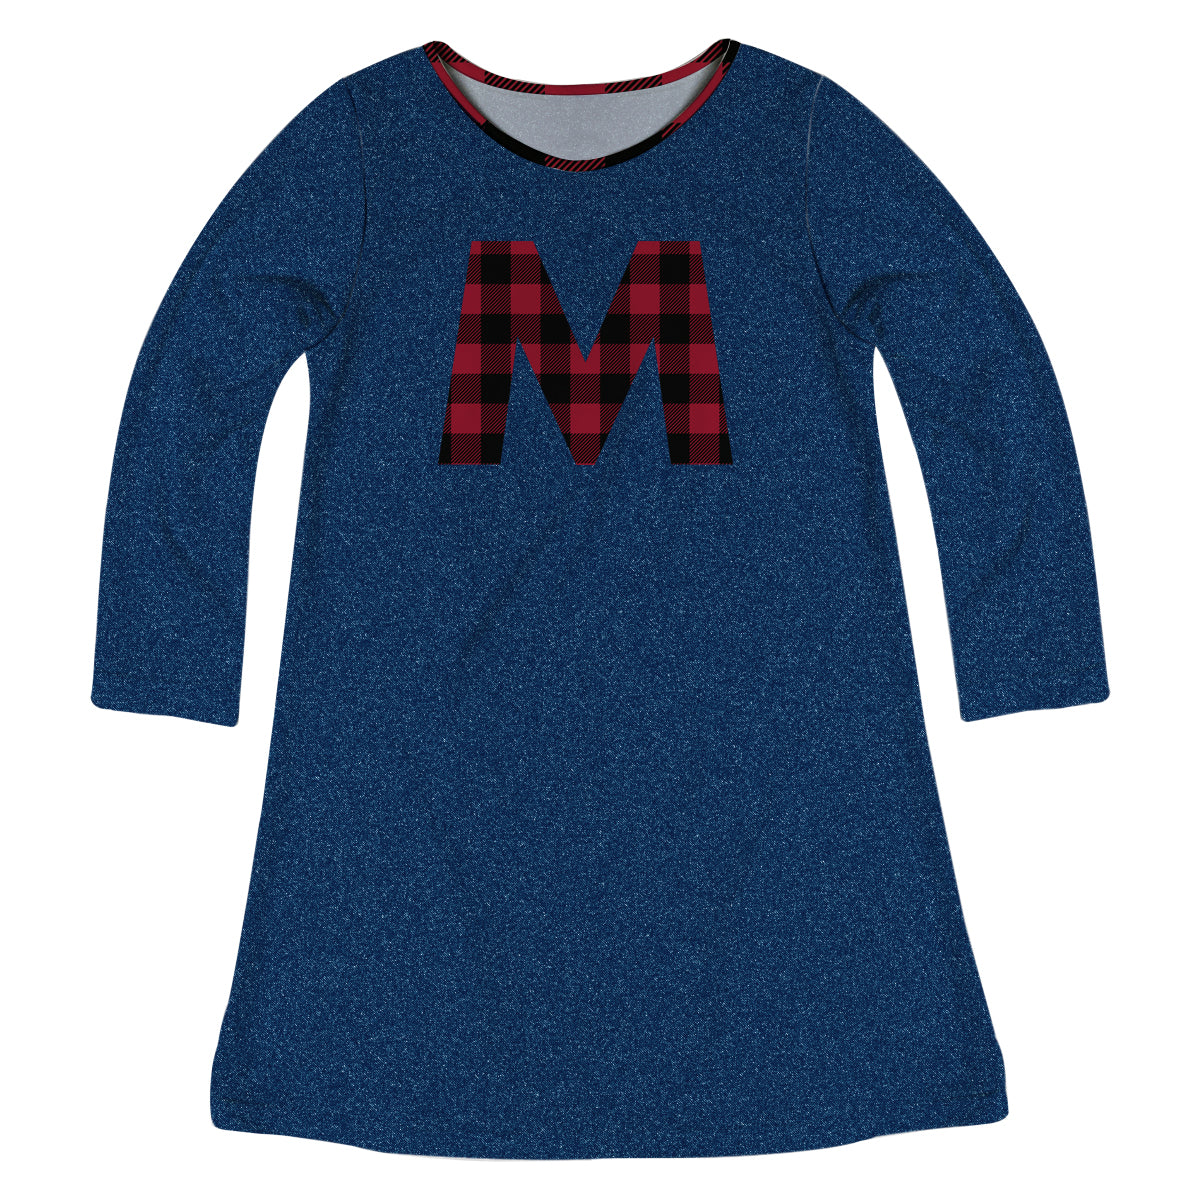 Girls navy denim and red plaid initial a line dress - Wimziy&Co.